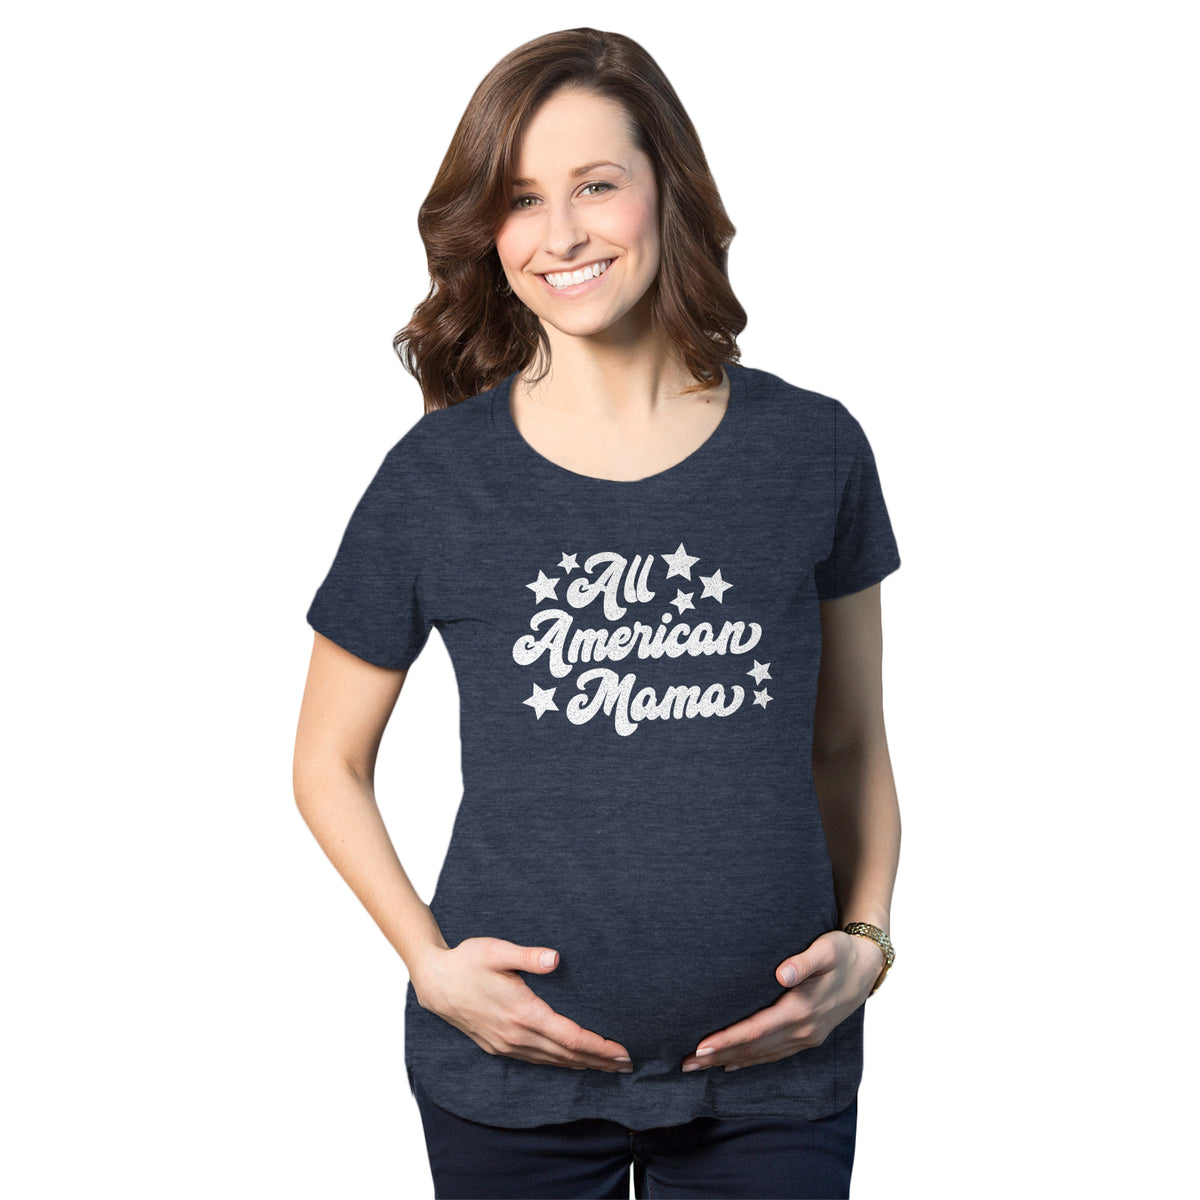 Funny Heather Navy All American Mama Maternity T Shirt Nerdy Fourth of July Political Tee